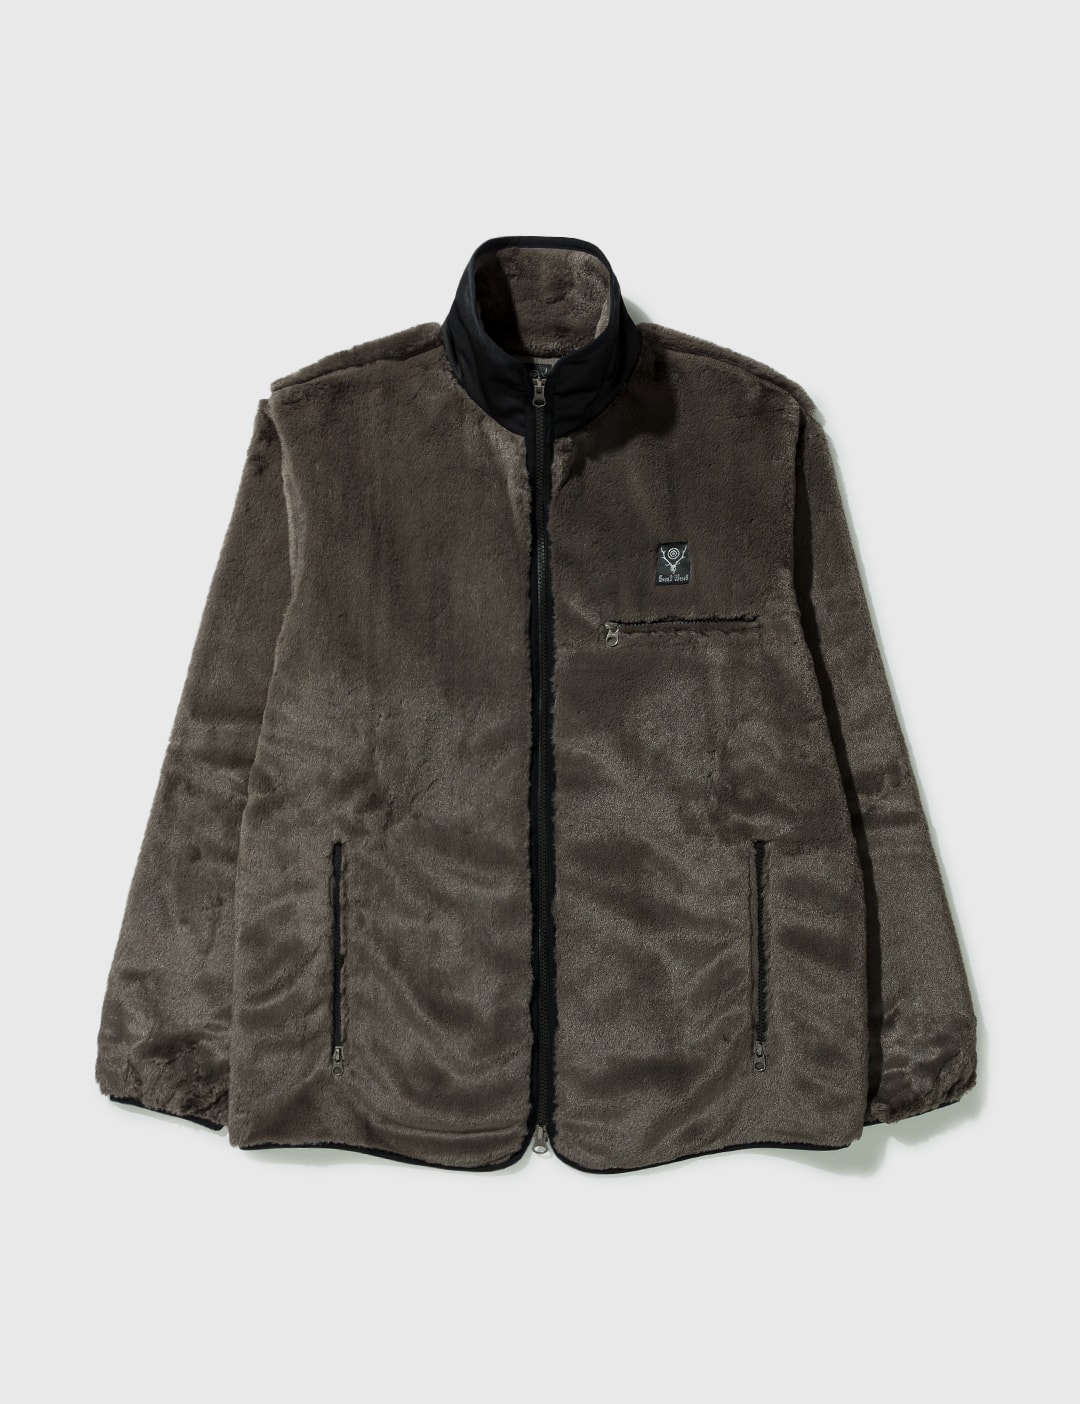 South2 West8 - Piping Jacket | HBX - Globally Curated Fashion and Lifestyle  by Hypebeast